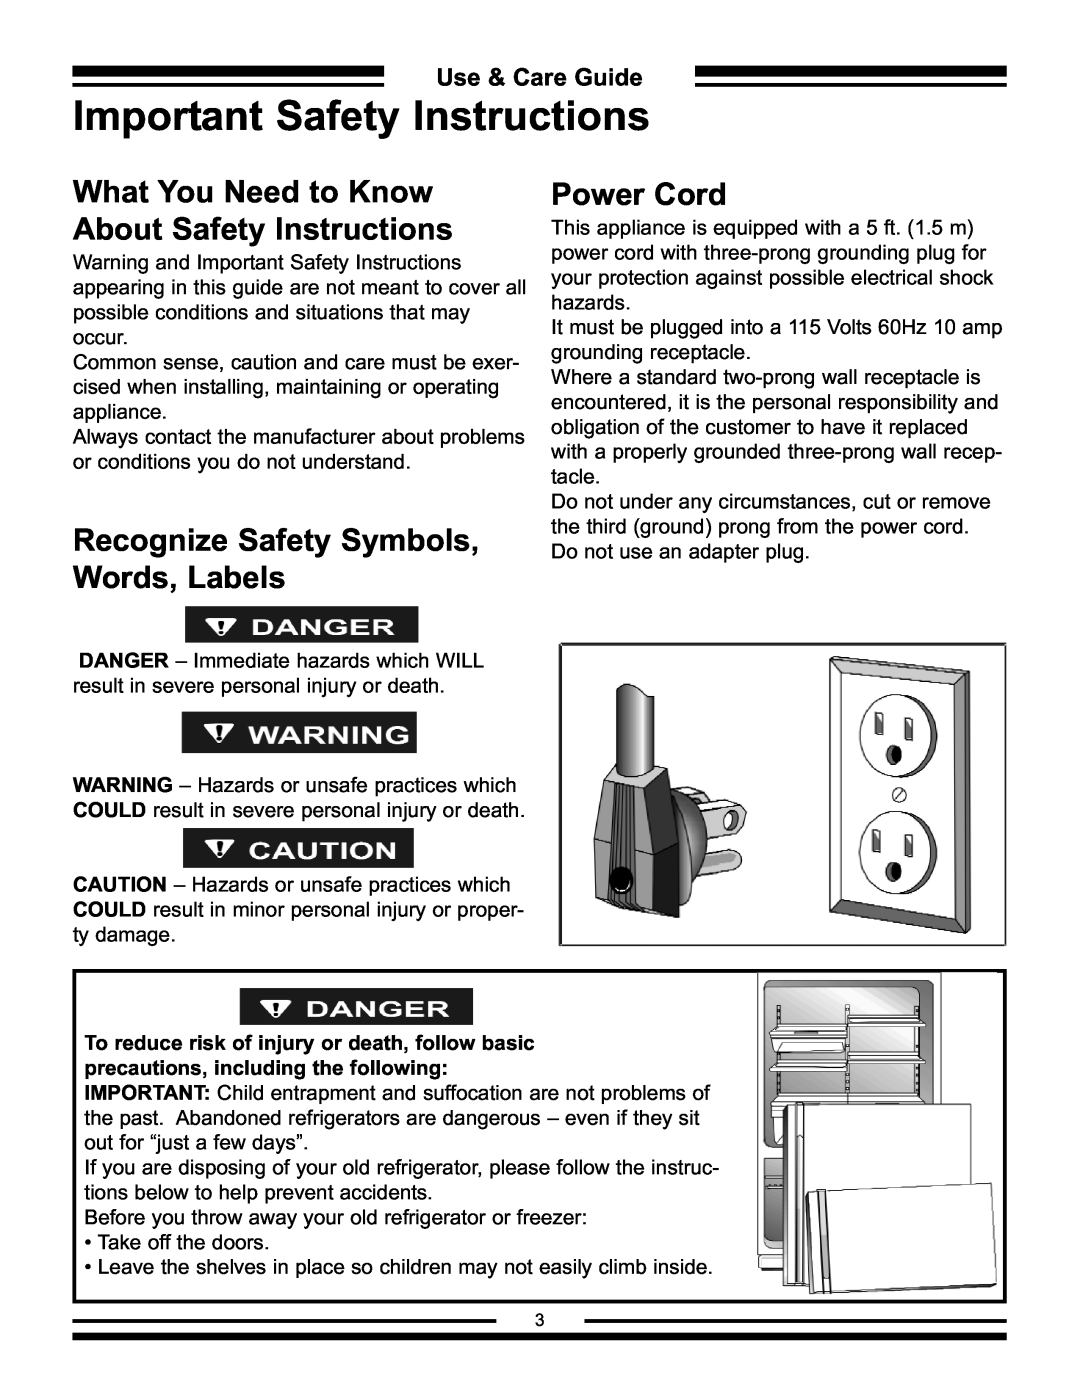 Aga Ranges AFHR-36 Recognize Safety Symbols, Words, Labels, Power Cord, Use & Care Guide, Important Safety Instructions 